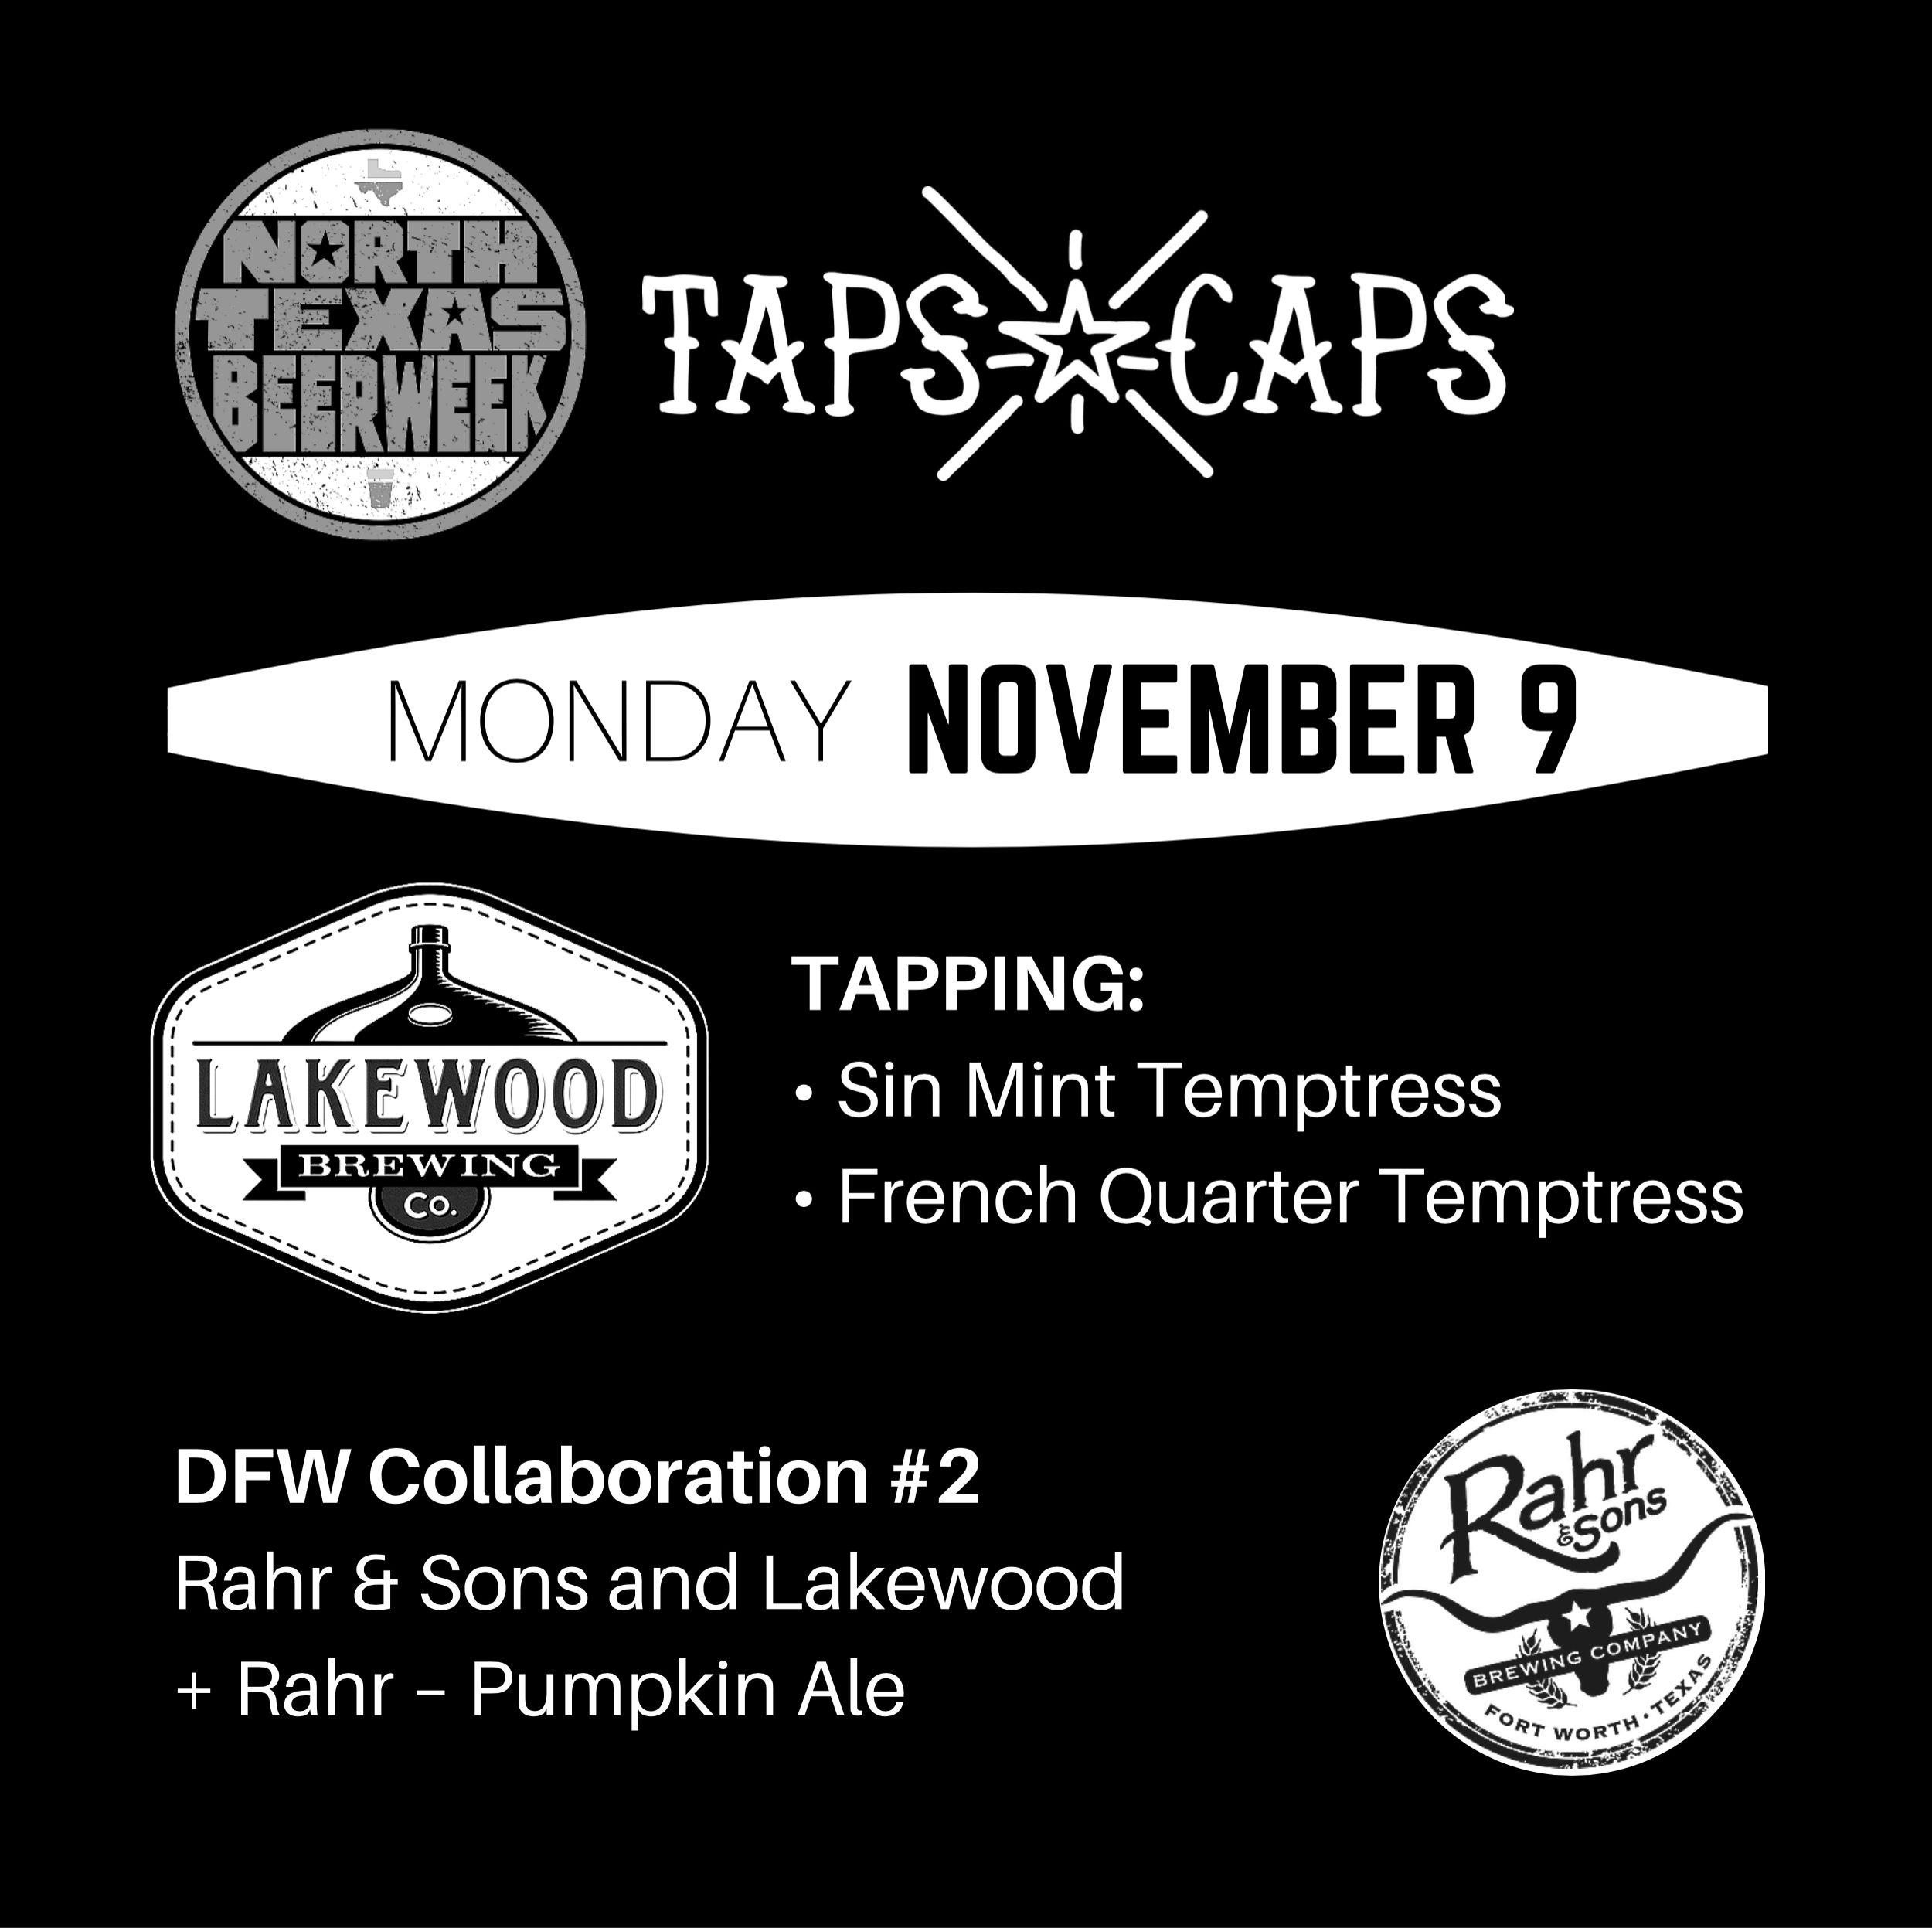 Rahr Logo - Lakewood Brewing Beer Collaboration with Rahr and Sons. Taps & Caps